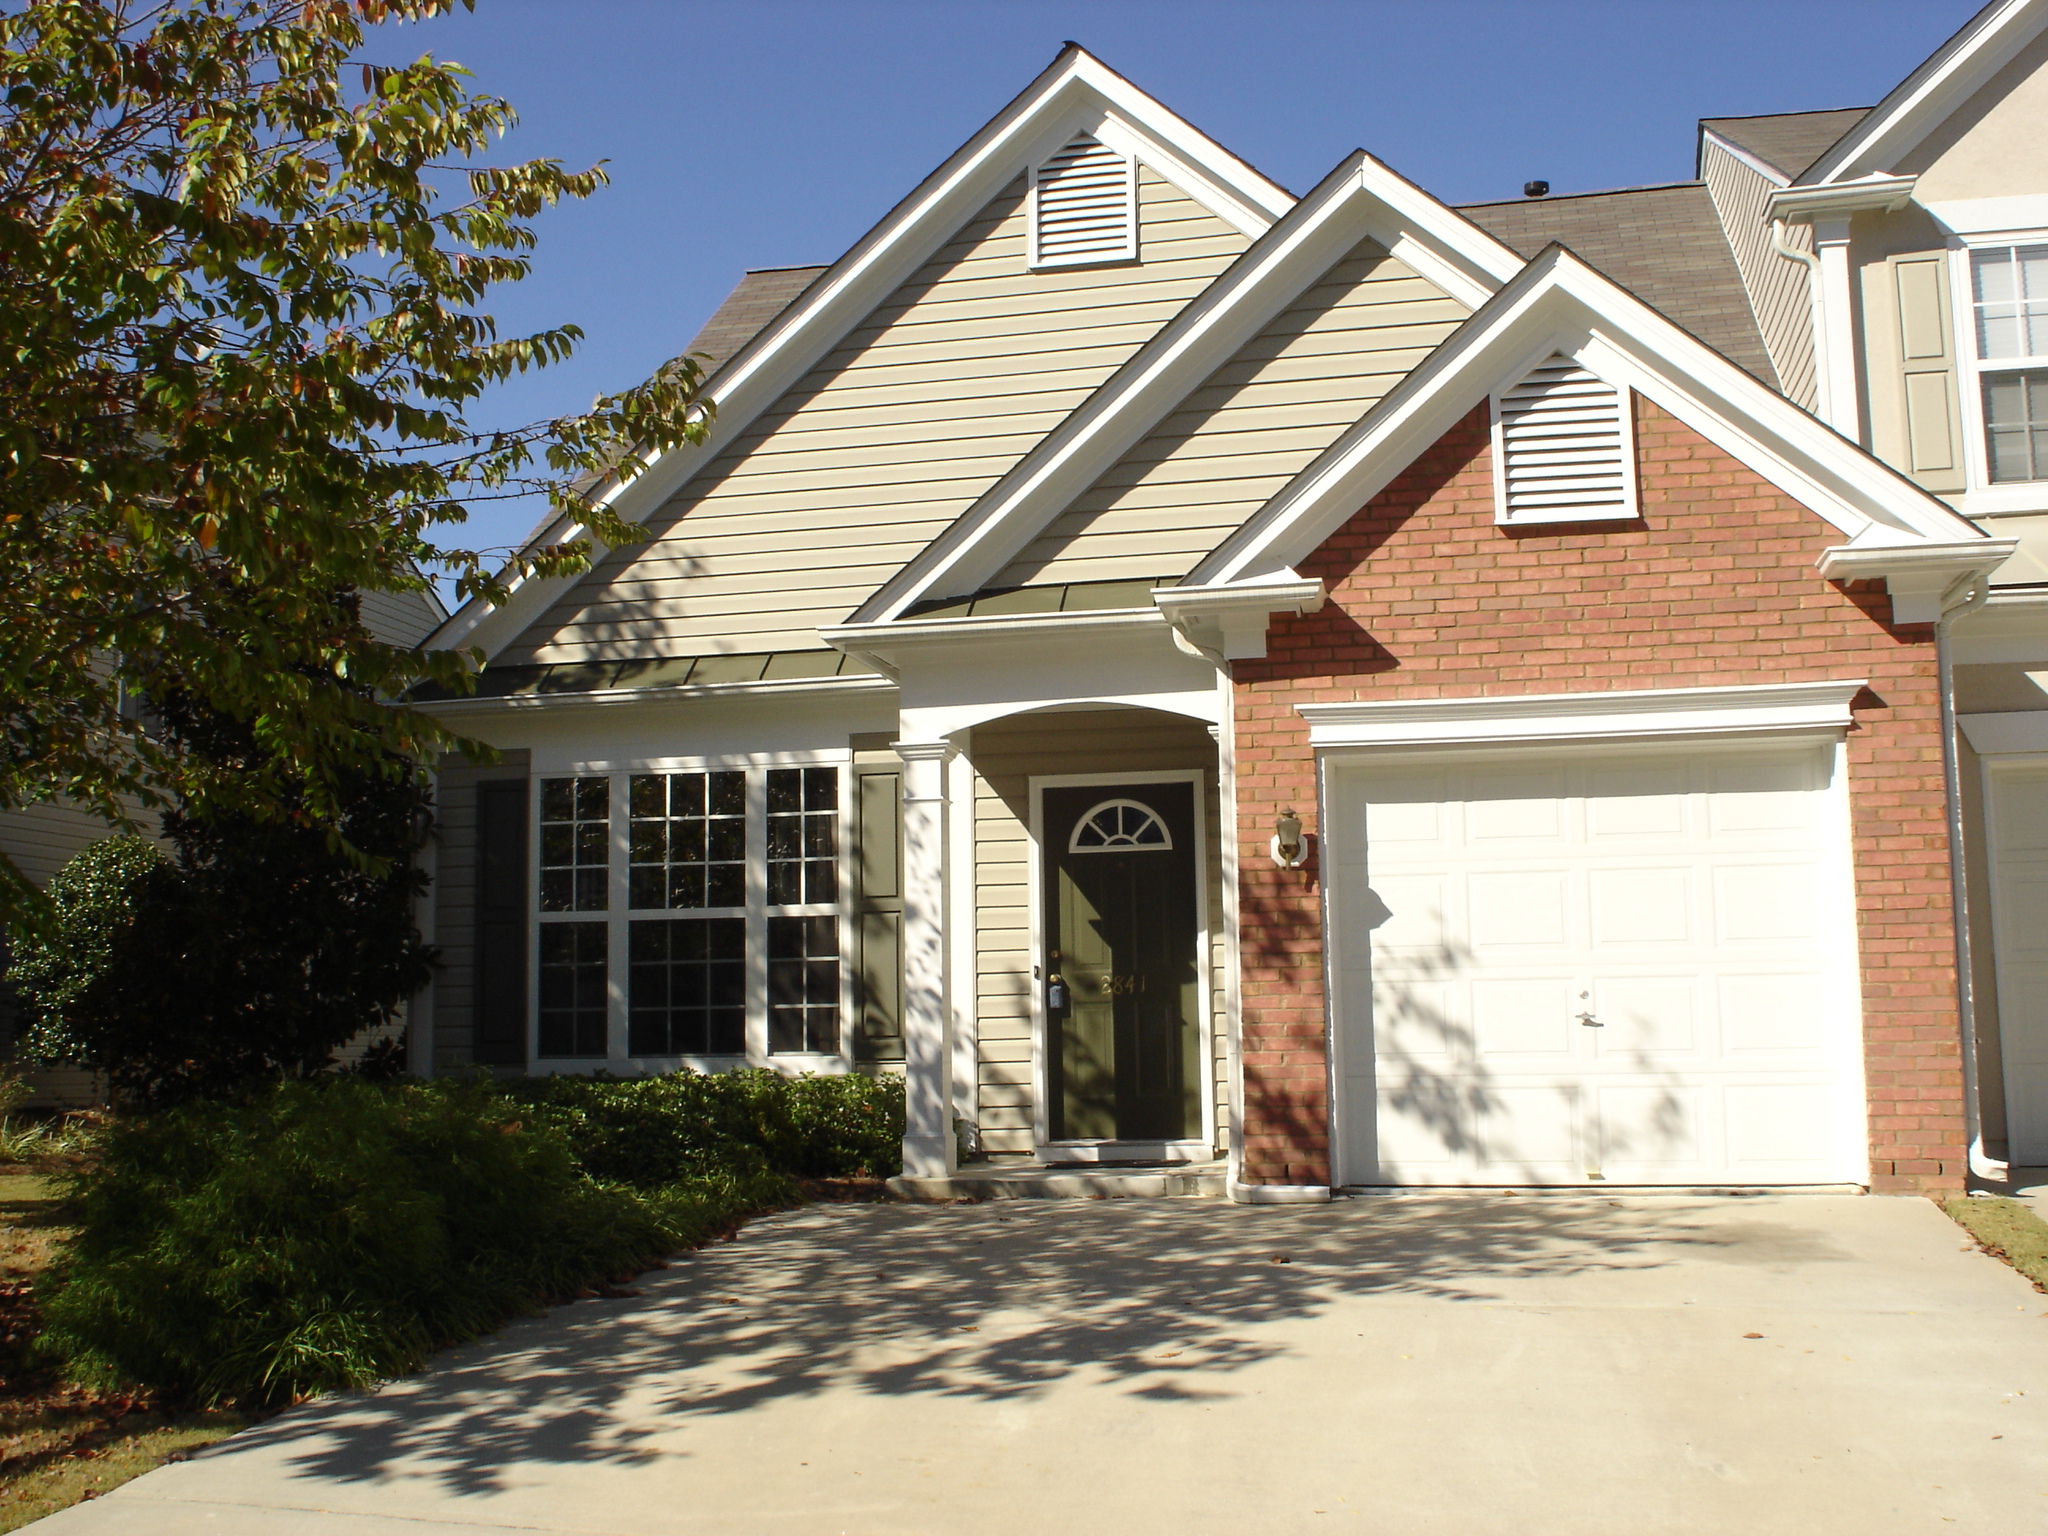 2841 Ashleigh Ln, 3BR/2.5BA Townhome for Lease in Alpharetta for $2500/month Rent